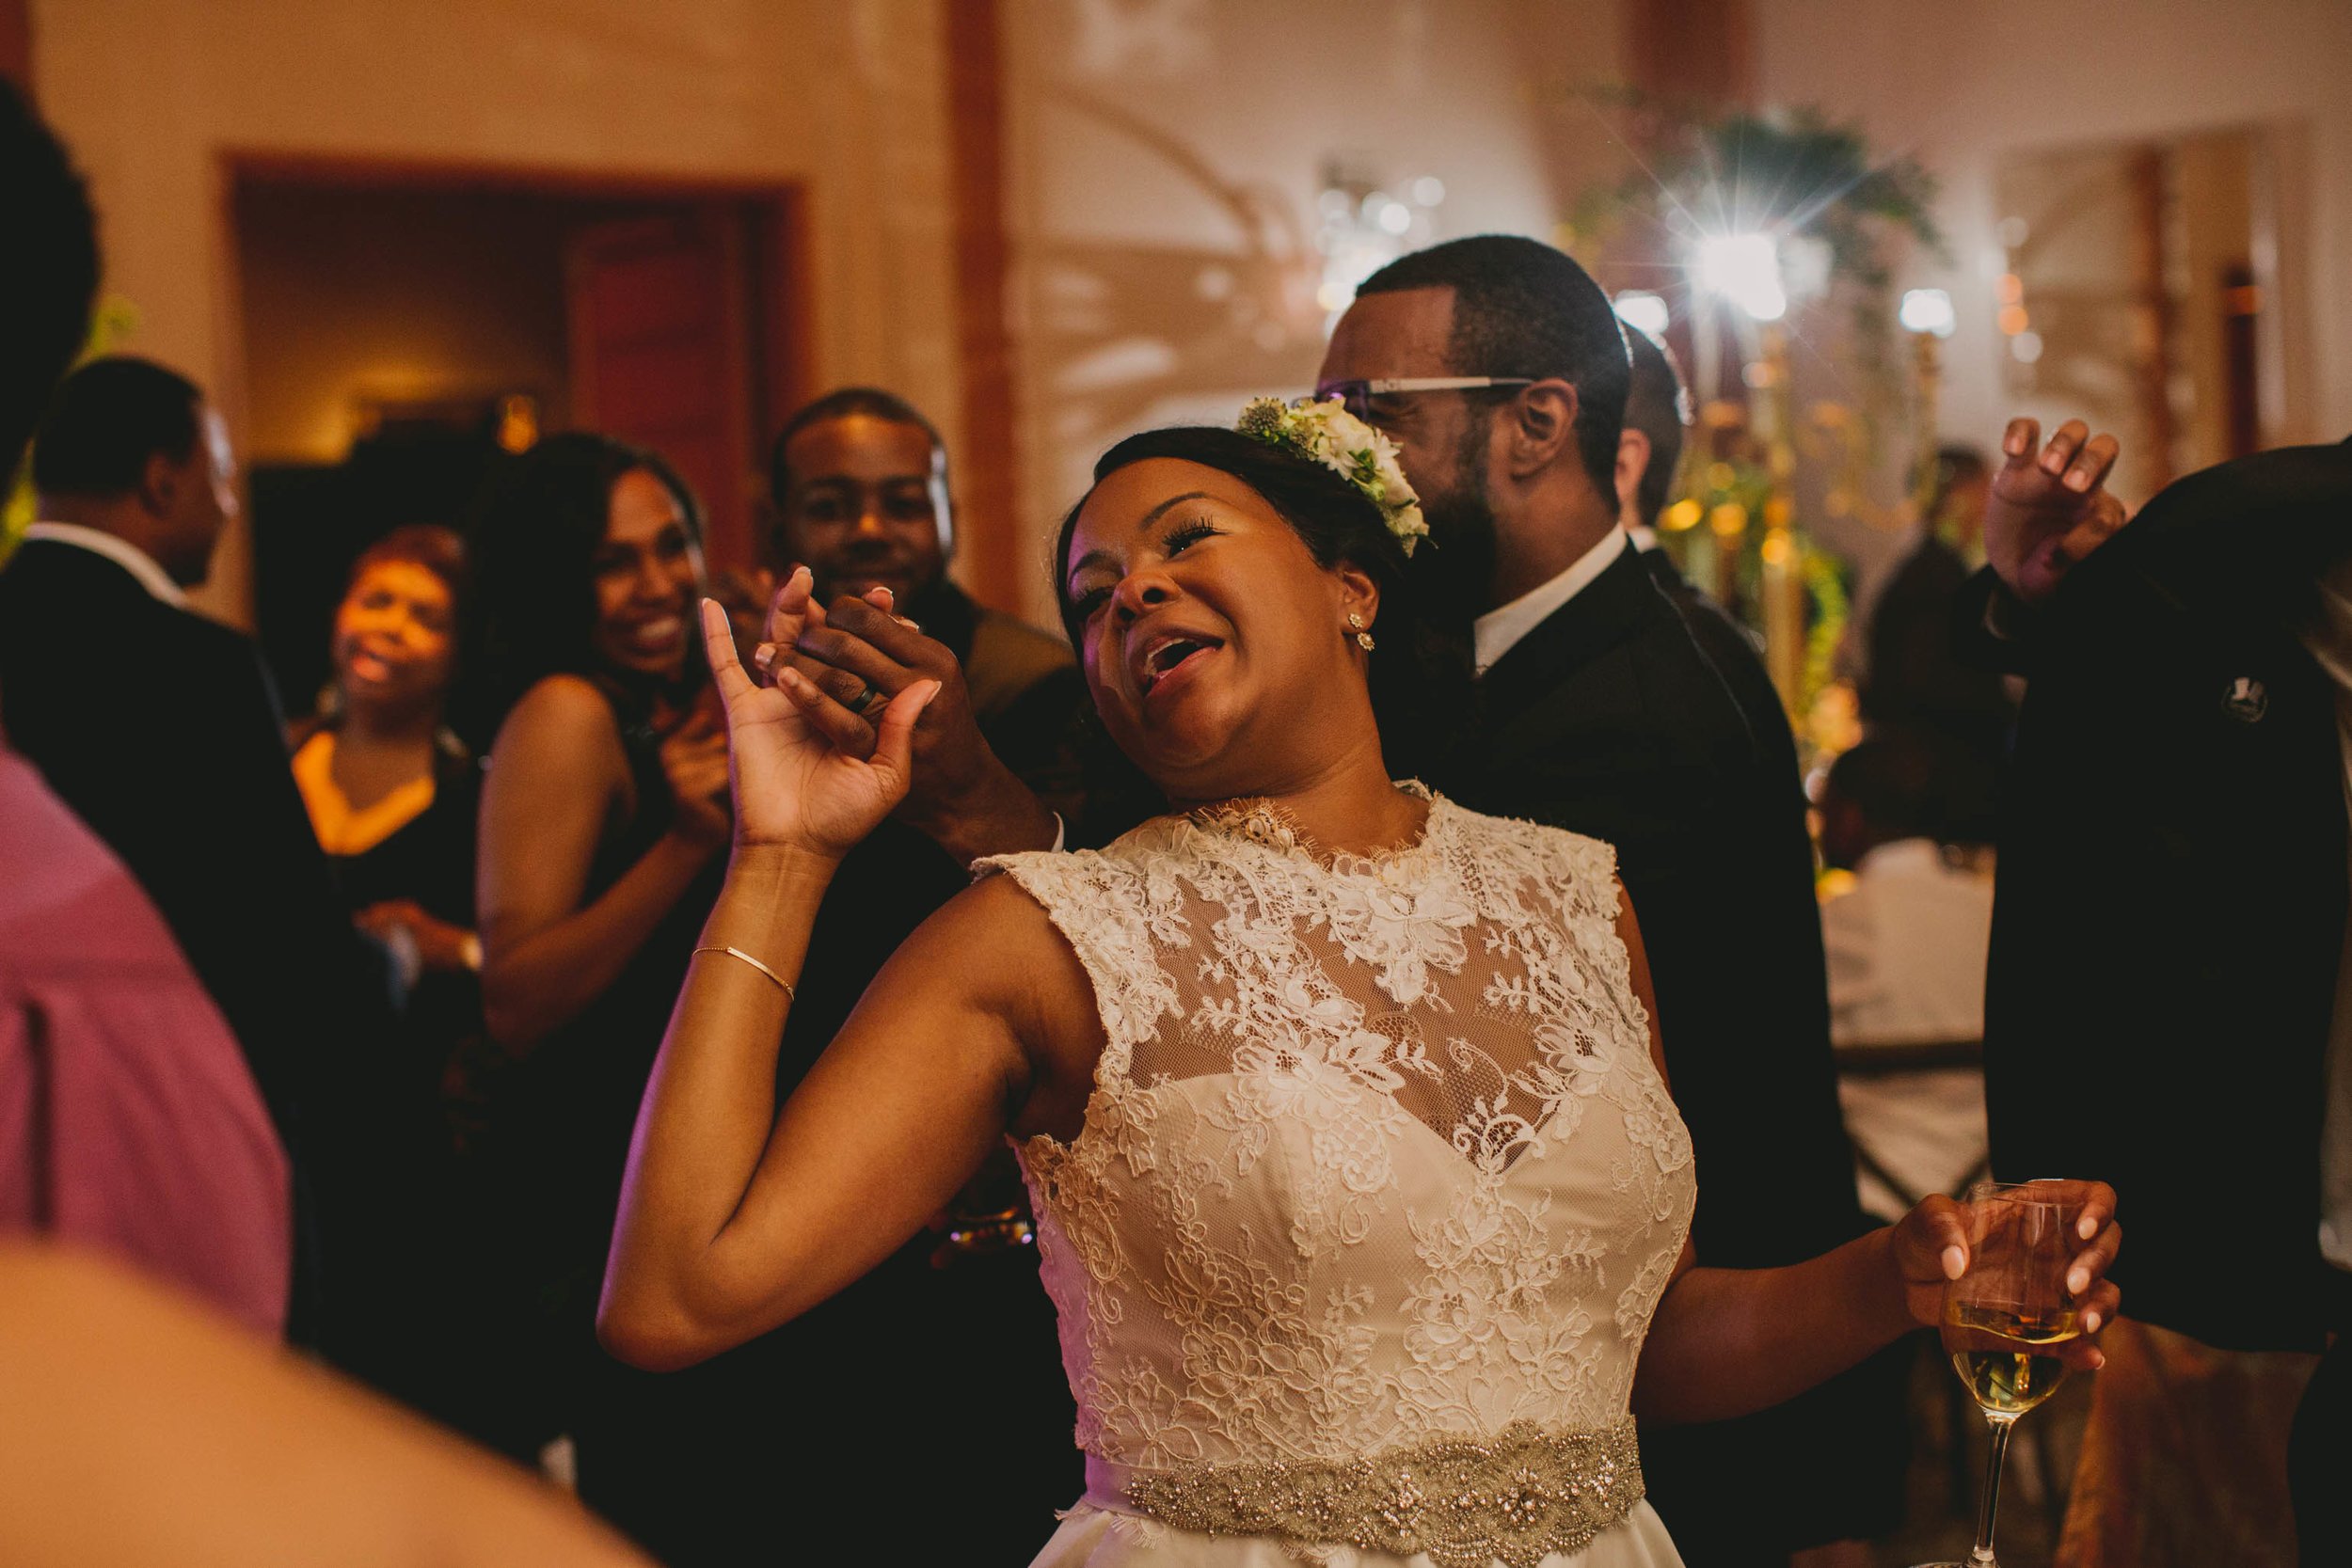 The bride and groom living it up during the last dance at their elegant Umstead Hotel and Spa wedding in Cary, NC